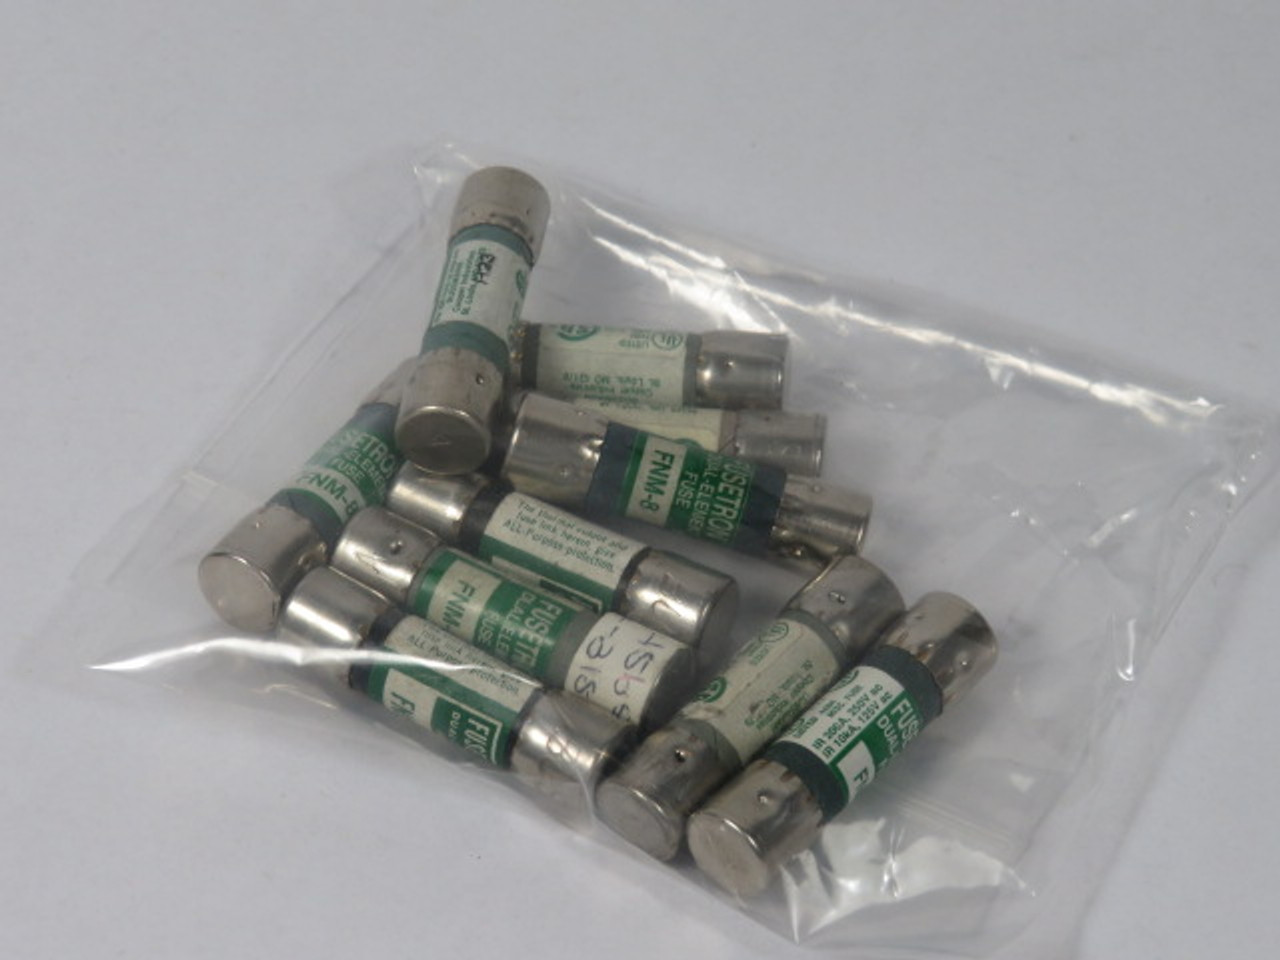 Fusetron FNM-8 Dual Element Fuse 8A 250V Lot of 10 USED